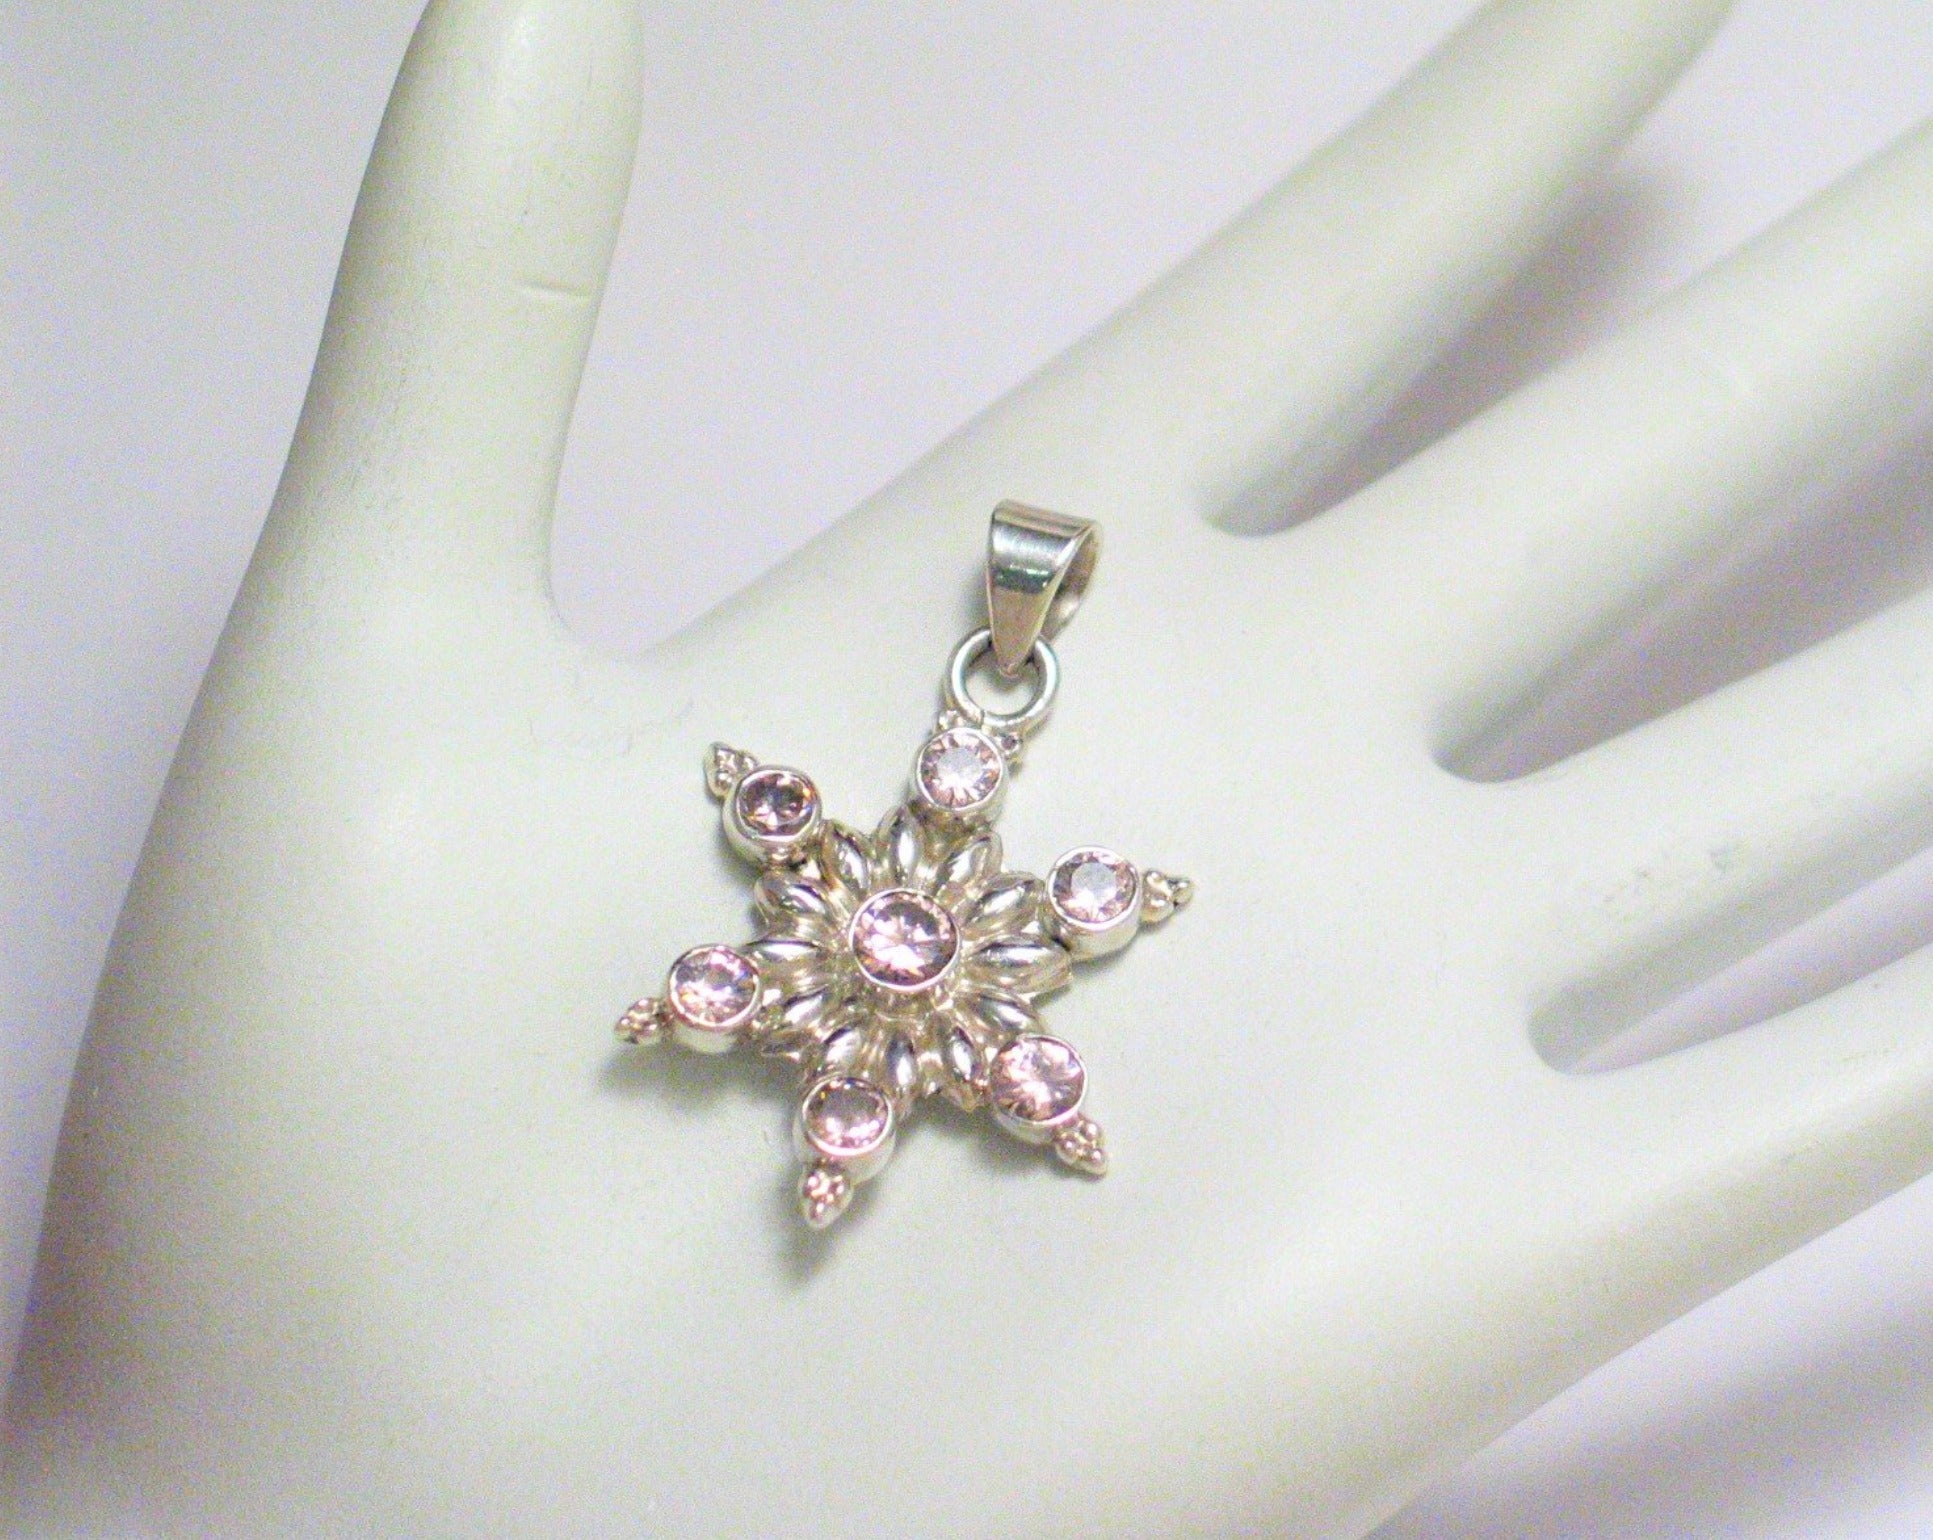 Pendant | Shimmery Sterling Silver Pink Cz Stone 6 Point Star Pendant